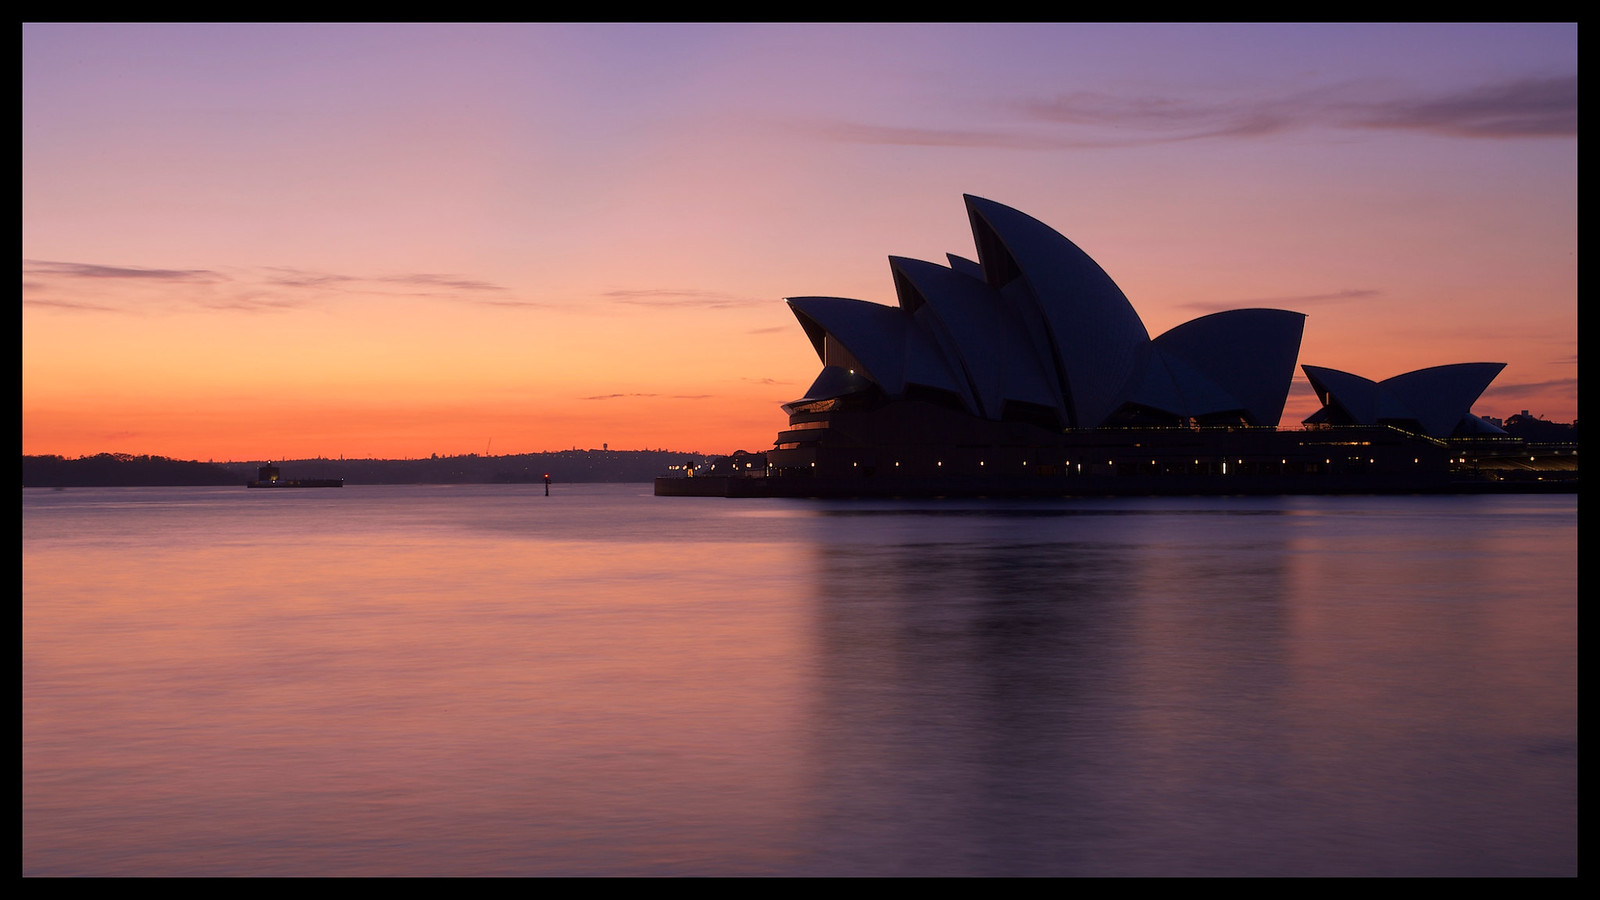 Opera House in a different light